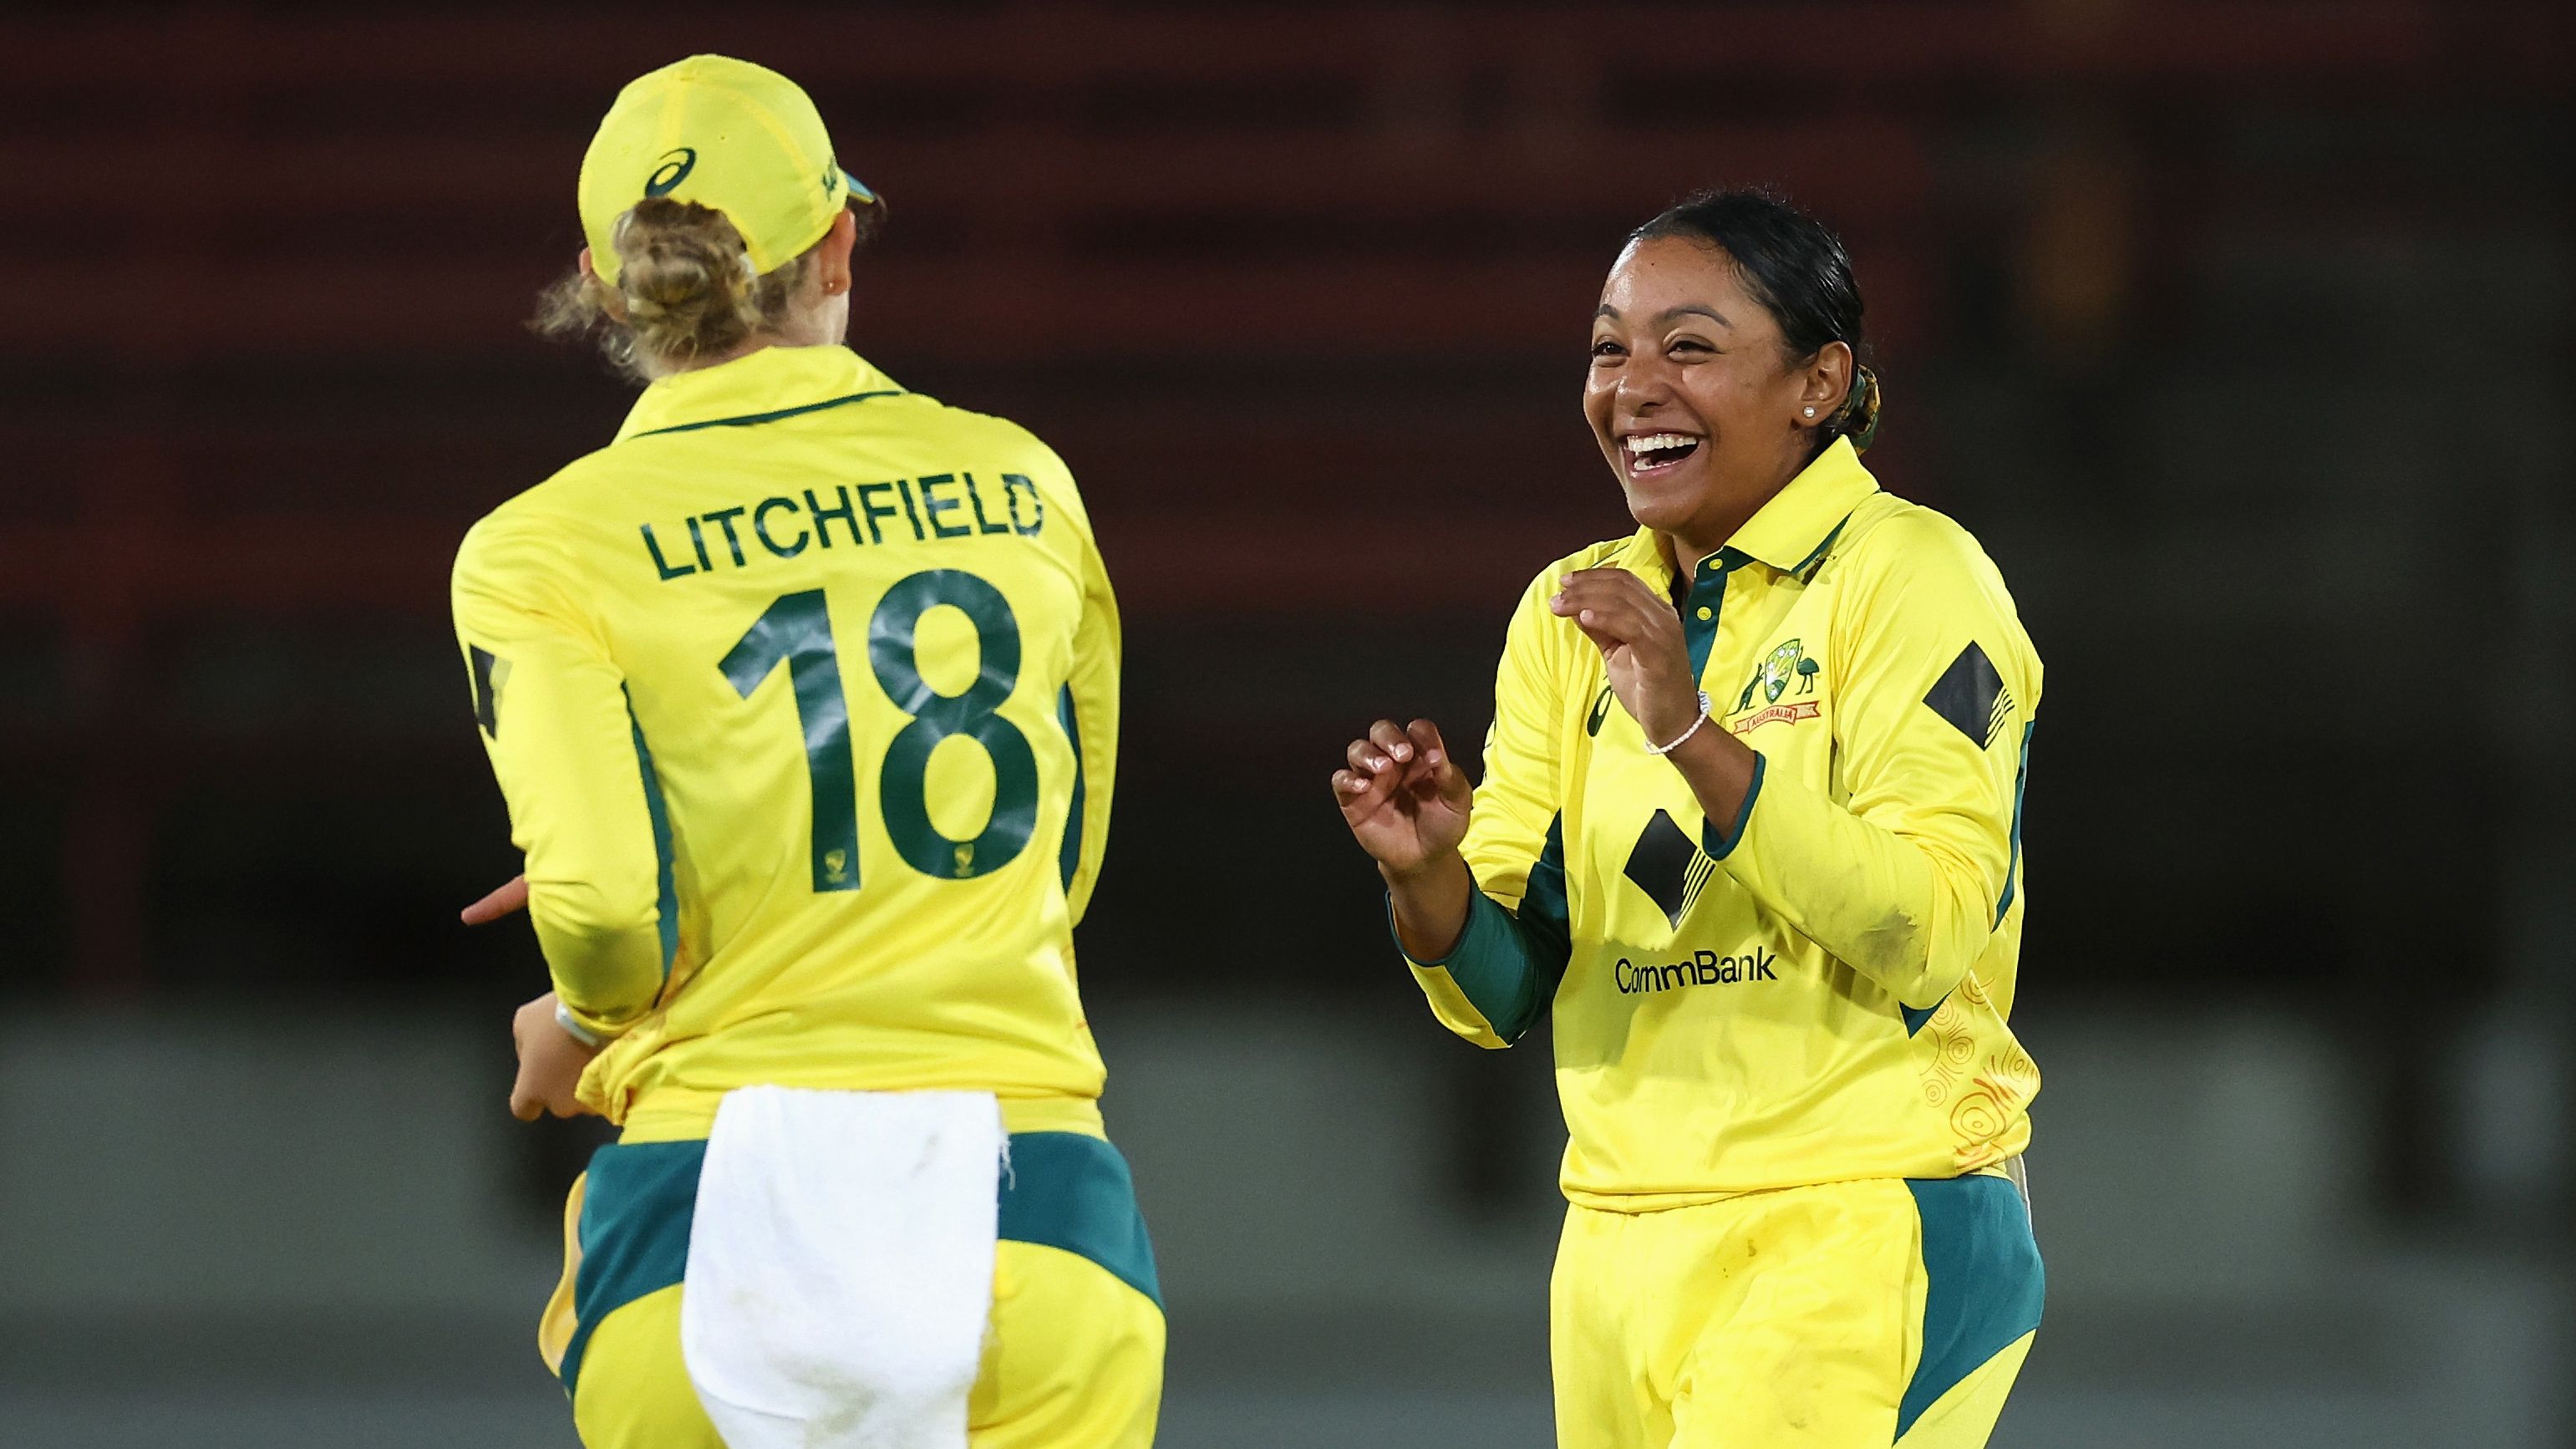 Alana King stars after 'confusing' incident to secure Australia's ODI series victory